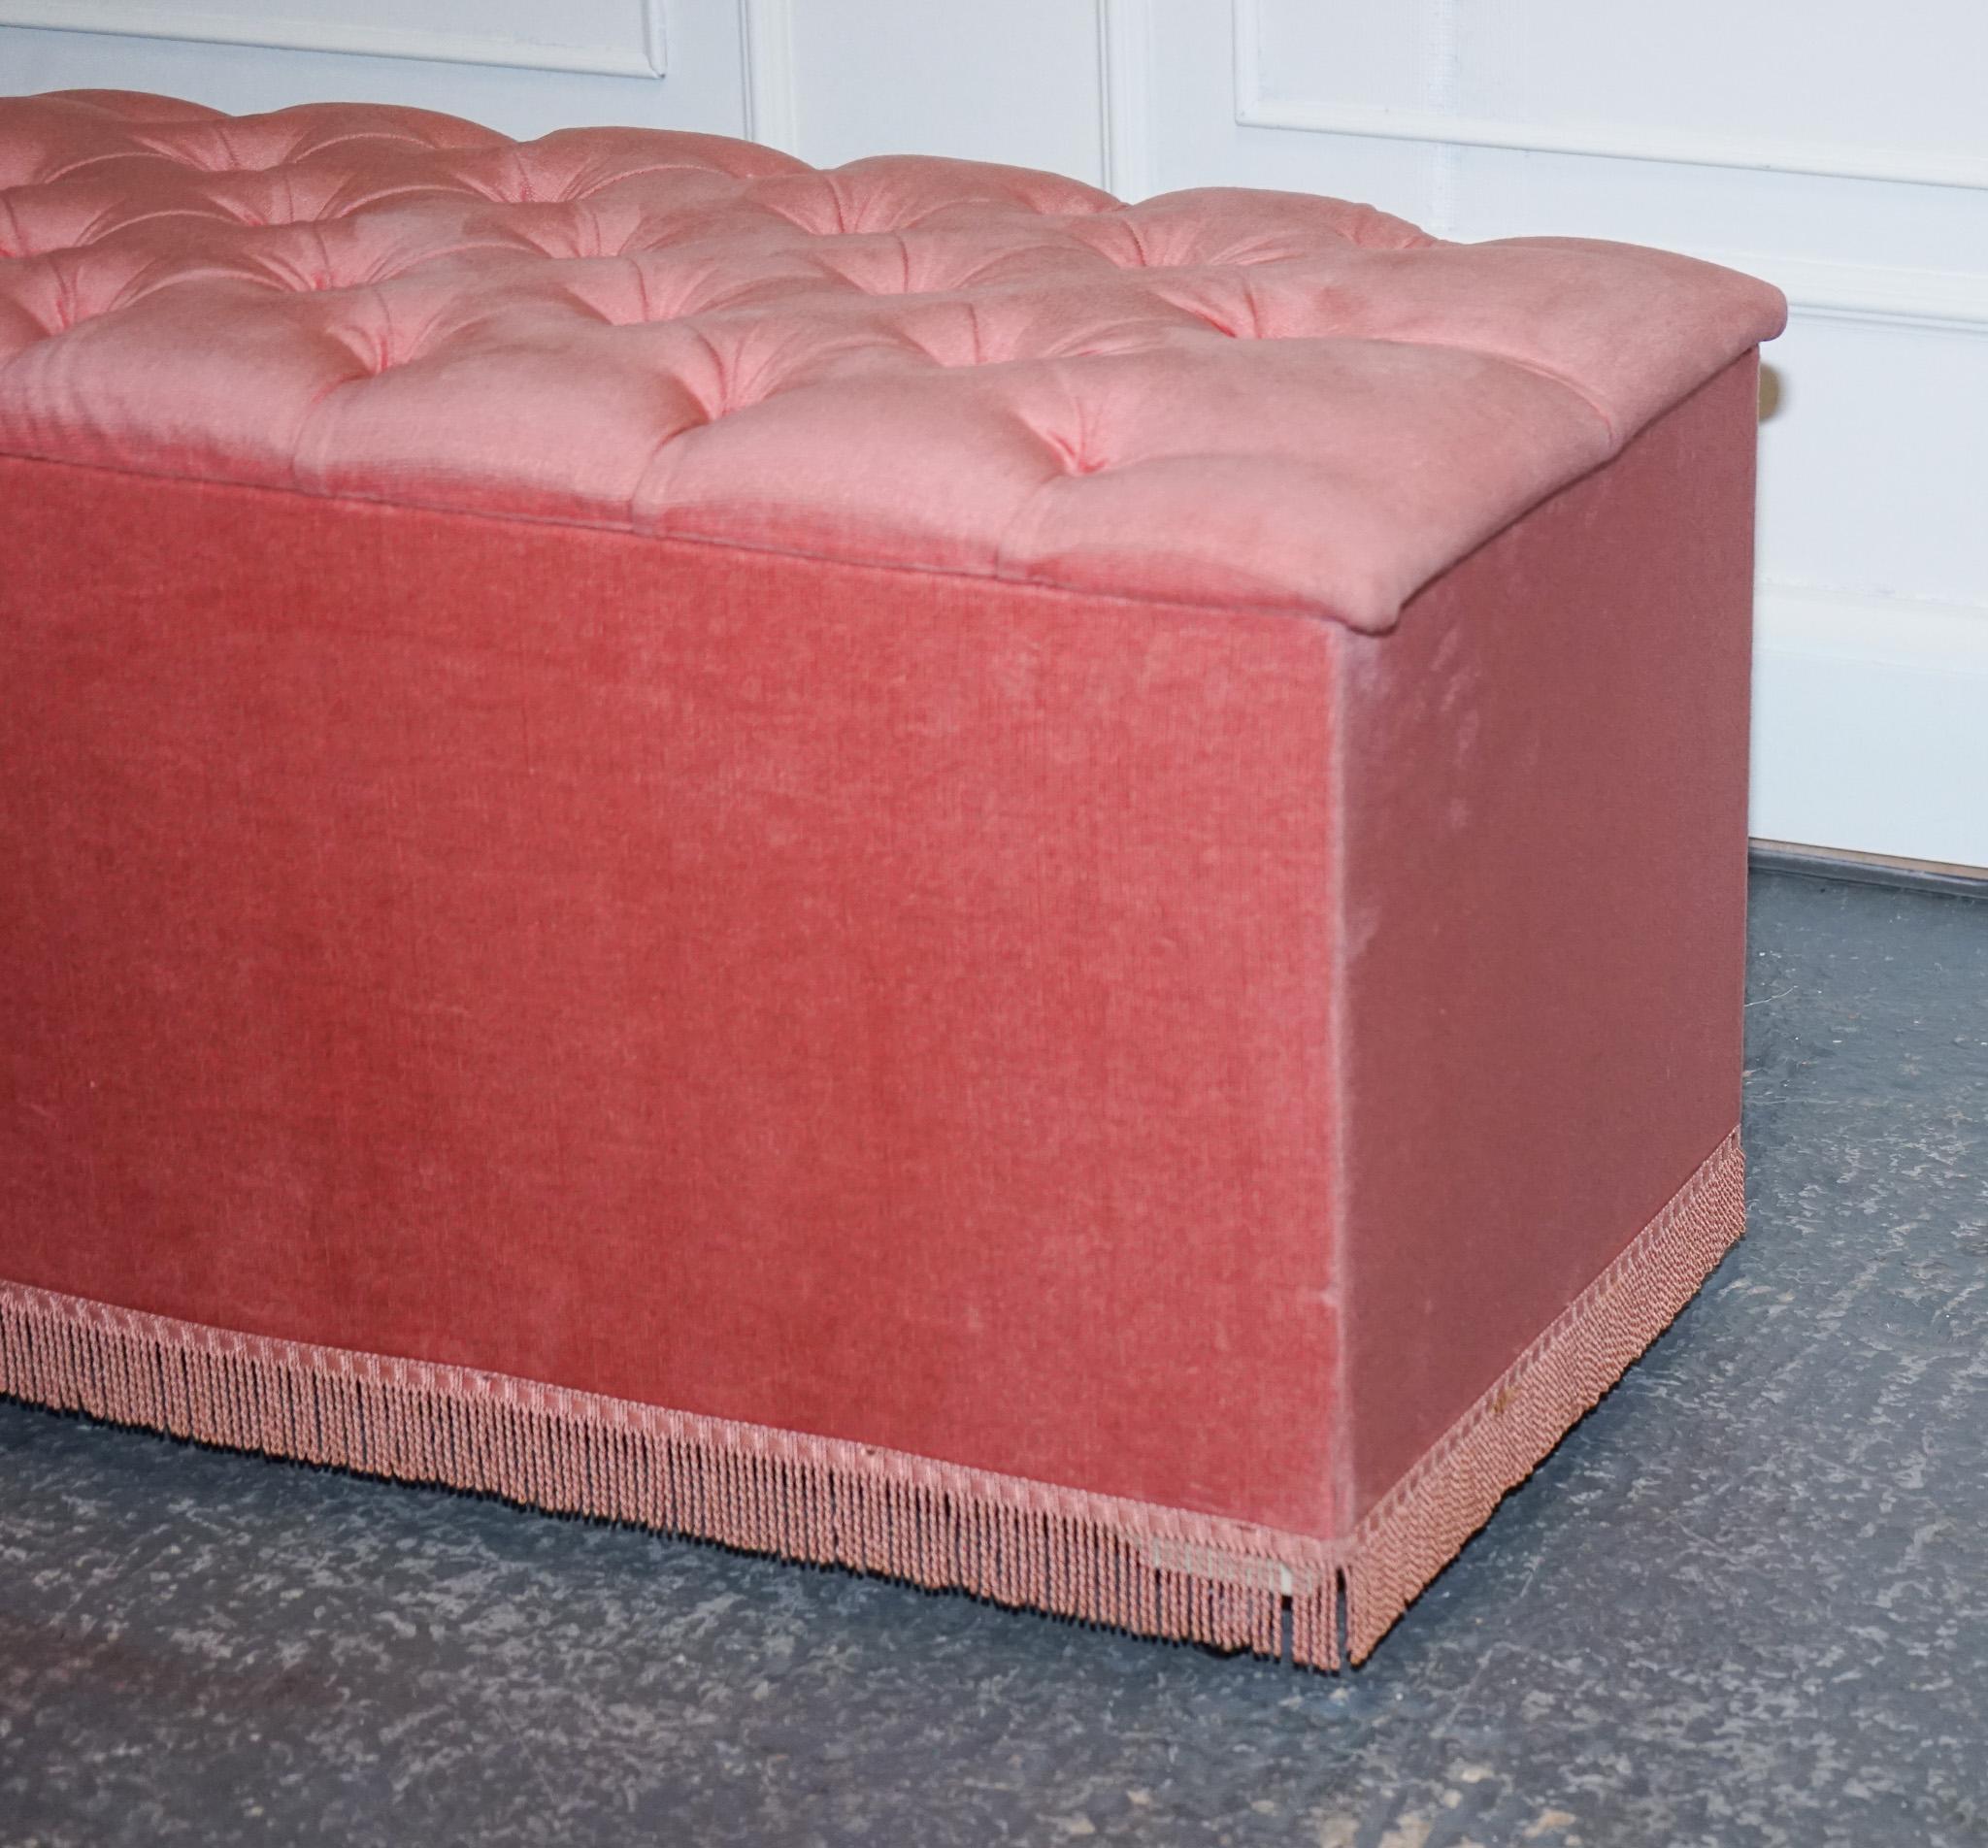 Victorian Vintage 1960s Large Tuffed Ottoman Bed End Storage Chest Box Trunk Fringed For Sale